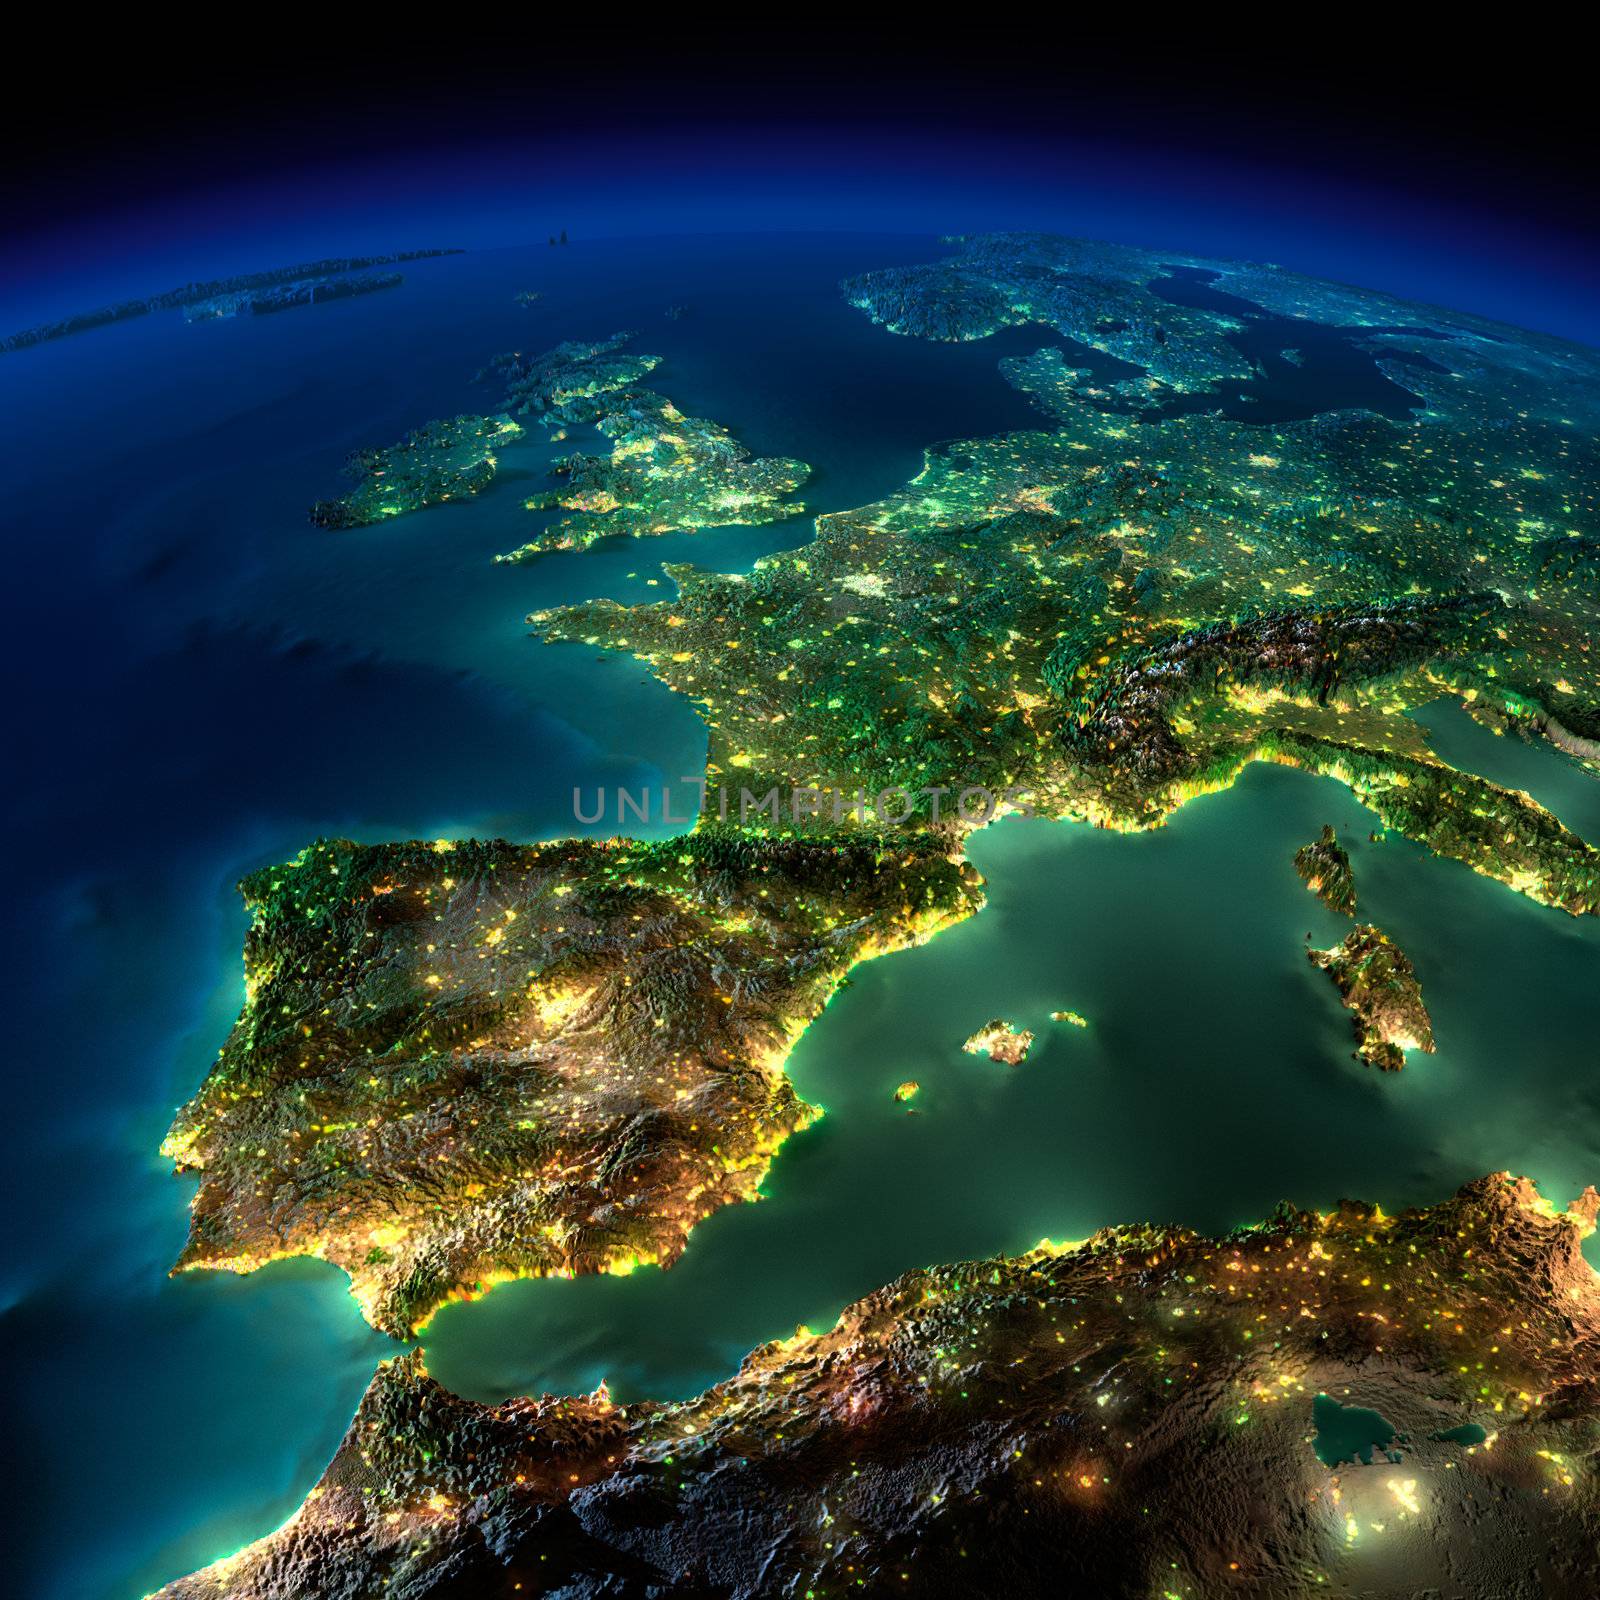 Night Earth. A piece of Europe - Spain, Portugal, France by Antartis